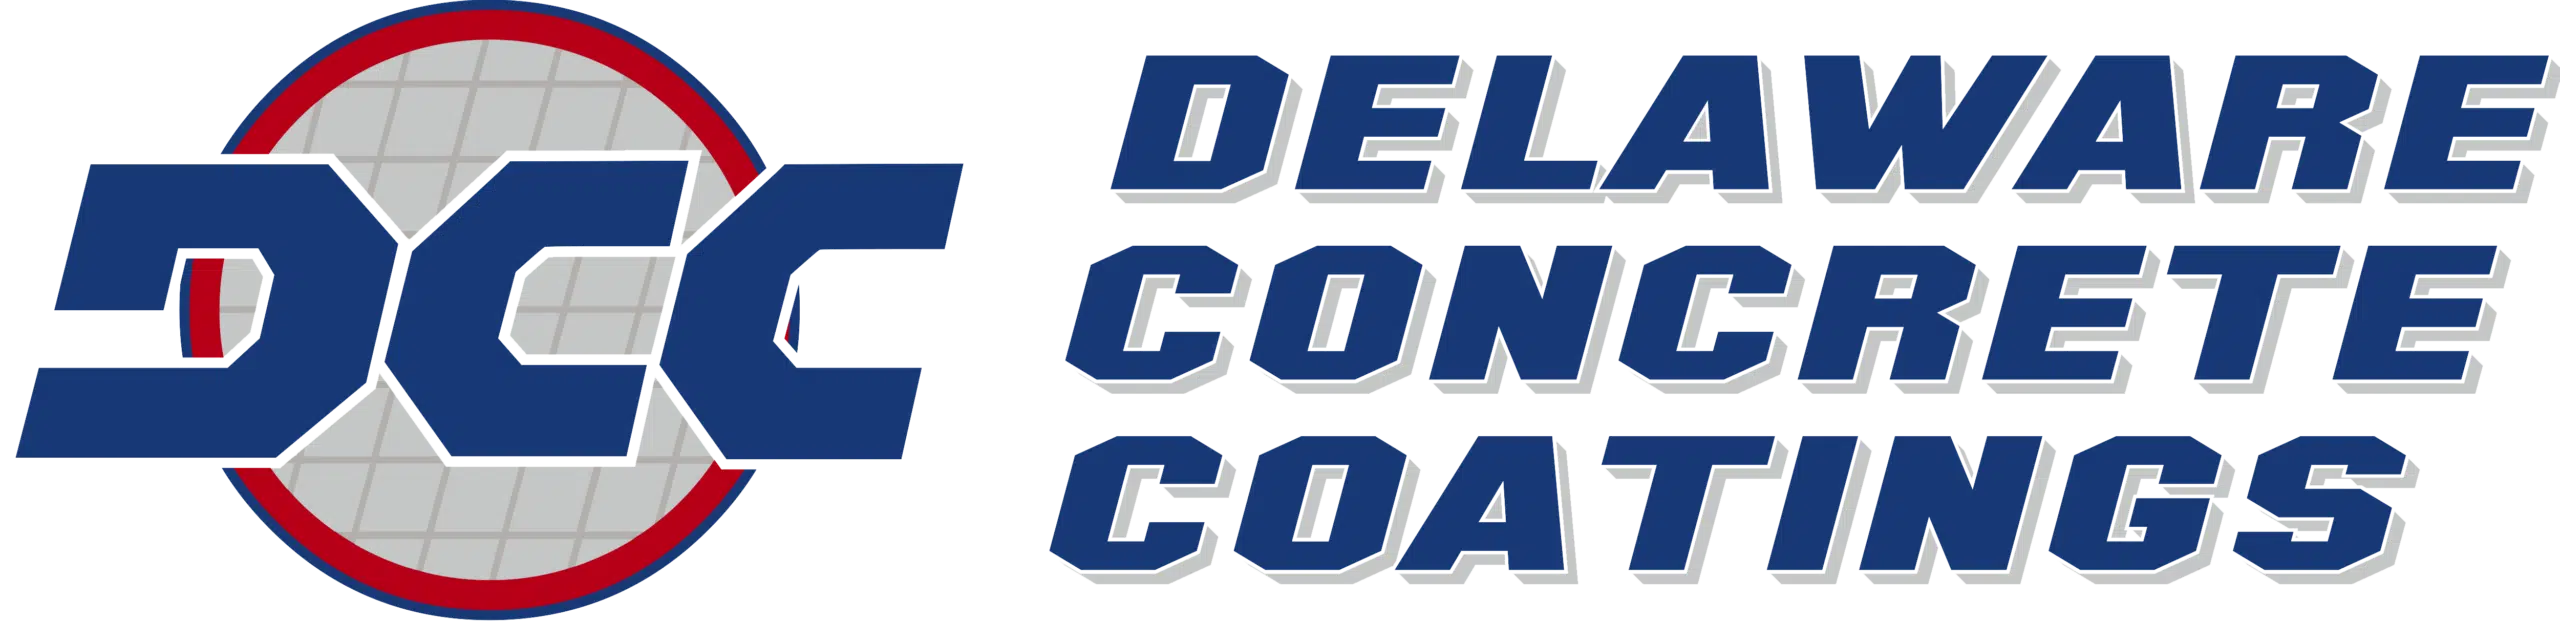 Delaware Concrete coatings logo with transparent background